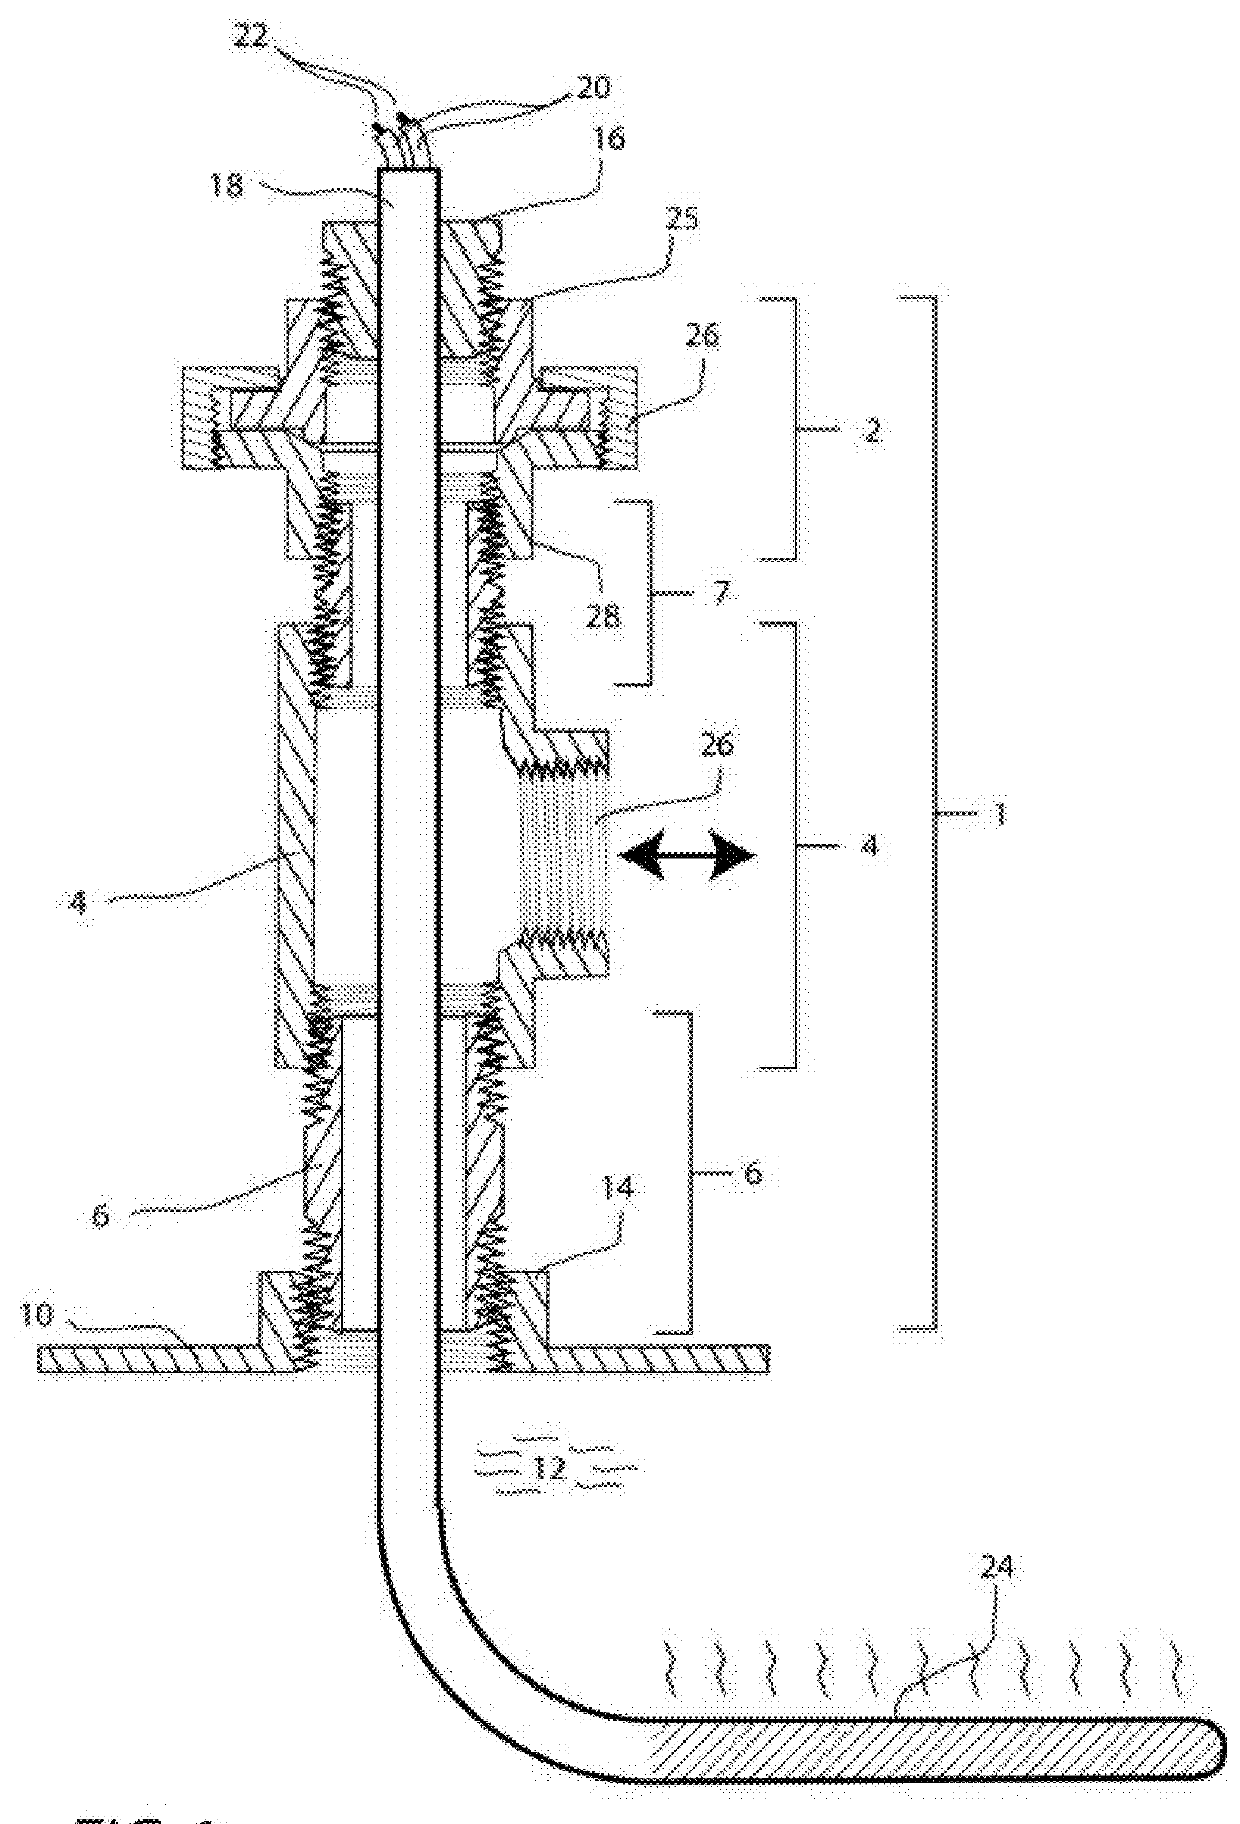 Adapter system and electric heaters for insertion into water tanks